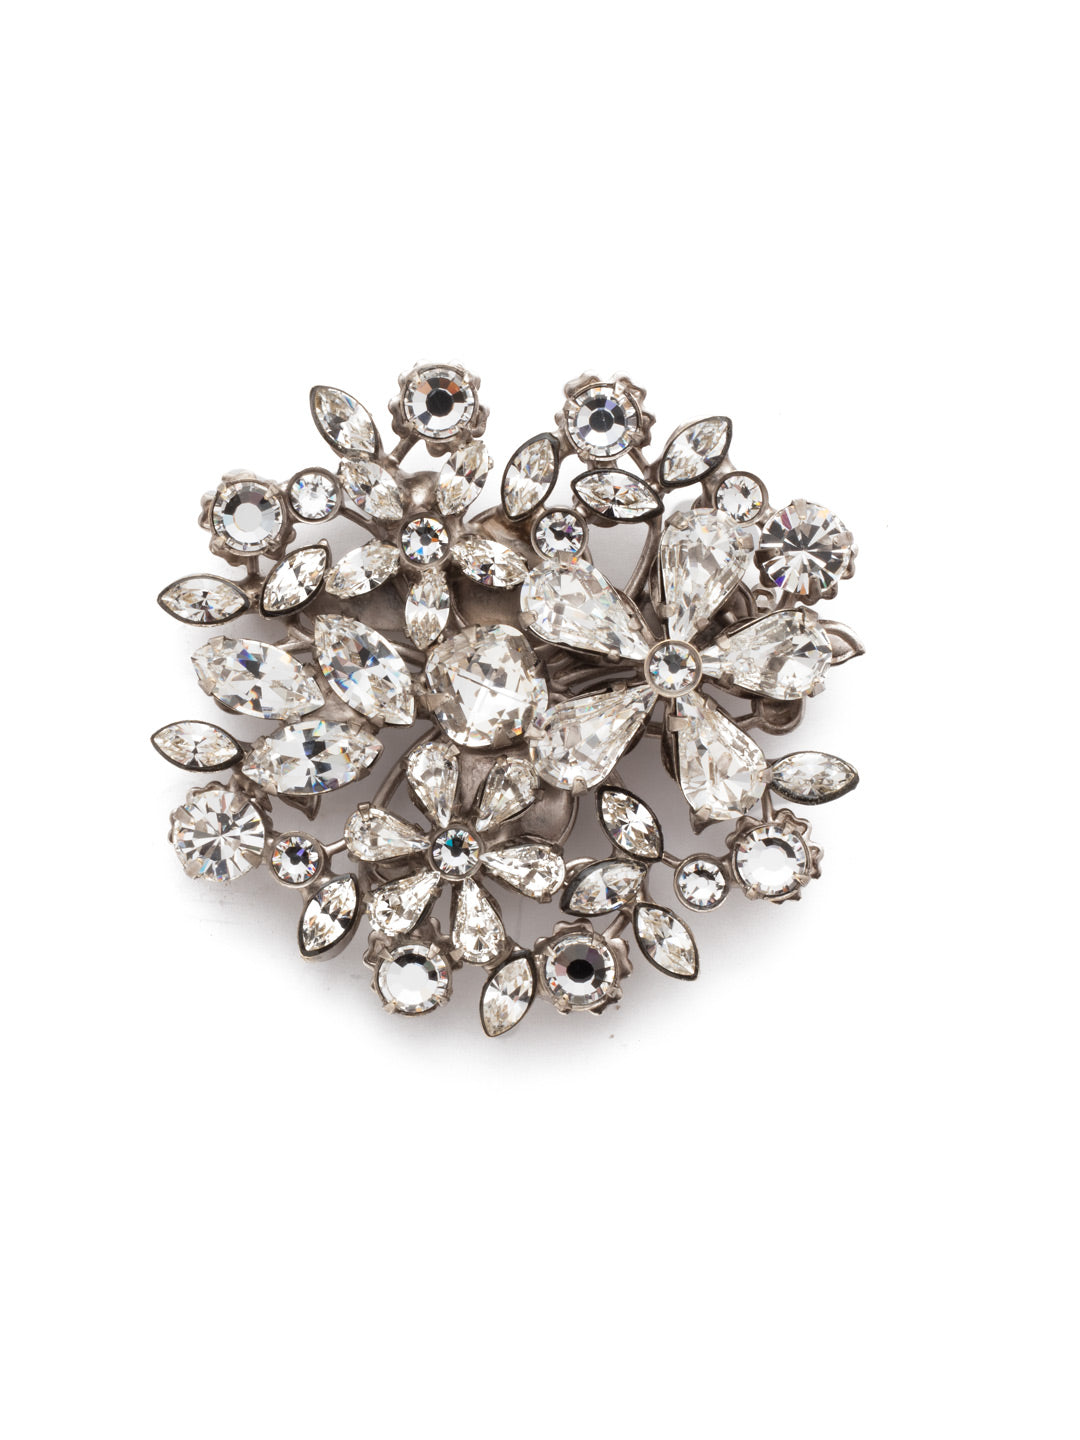 Floral Cluster Brooch Pin - PBK47ASCRY